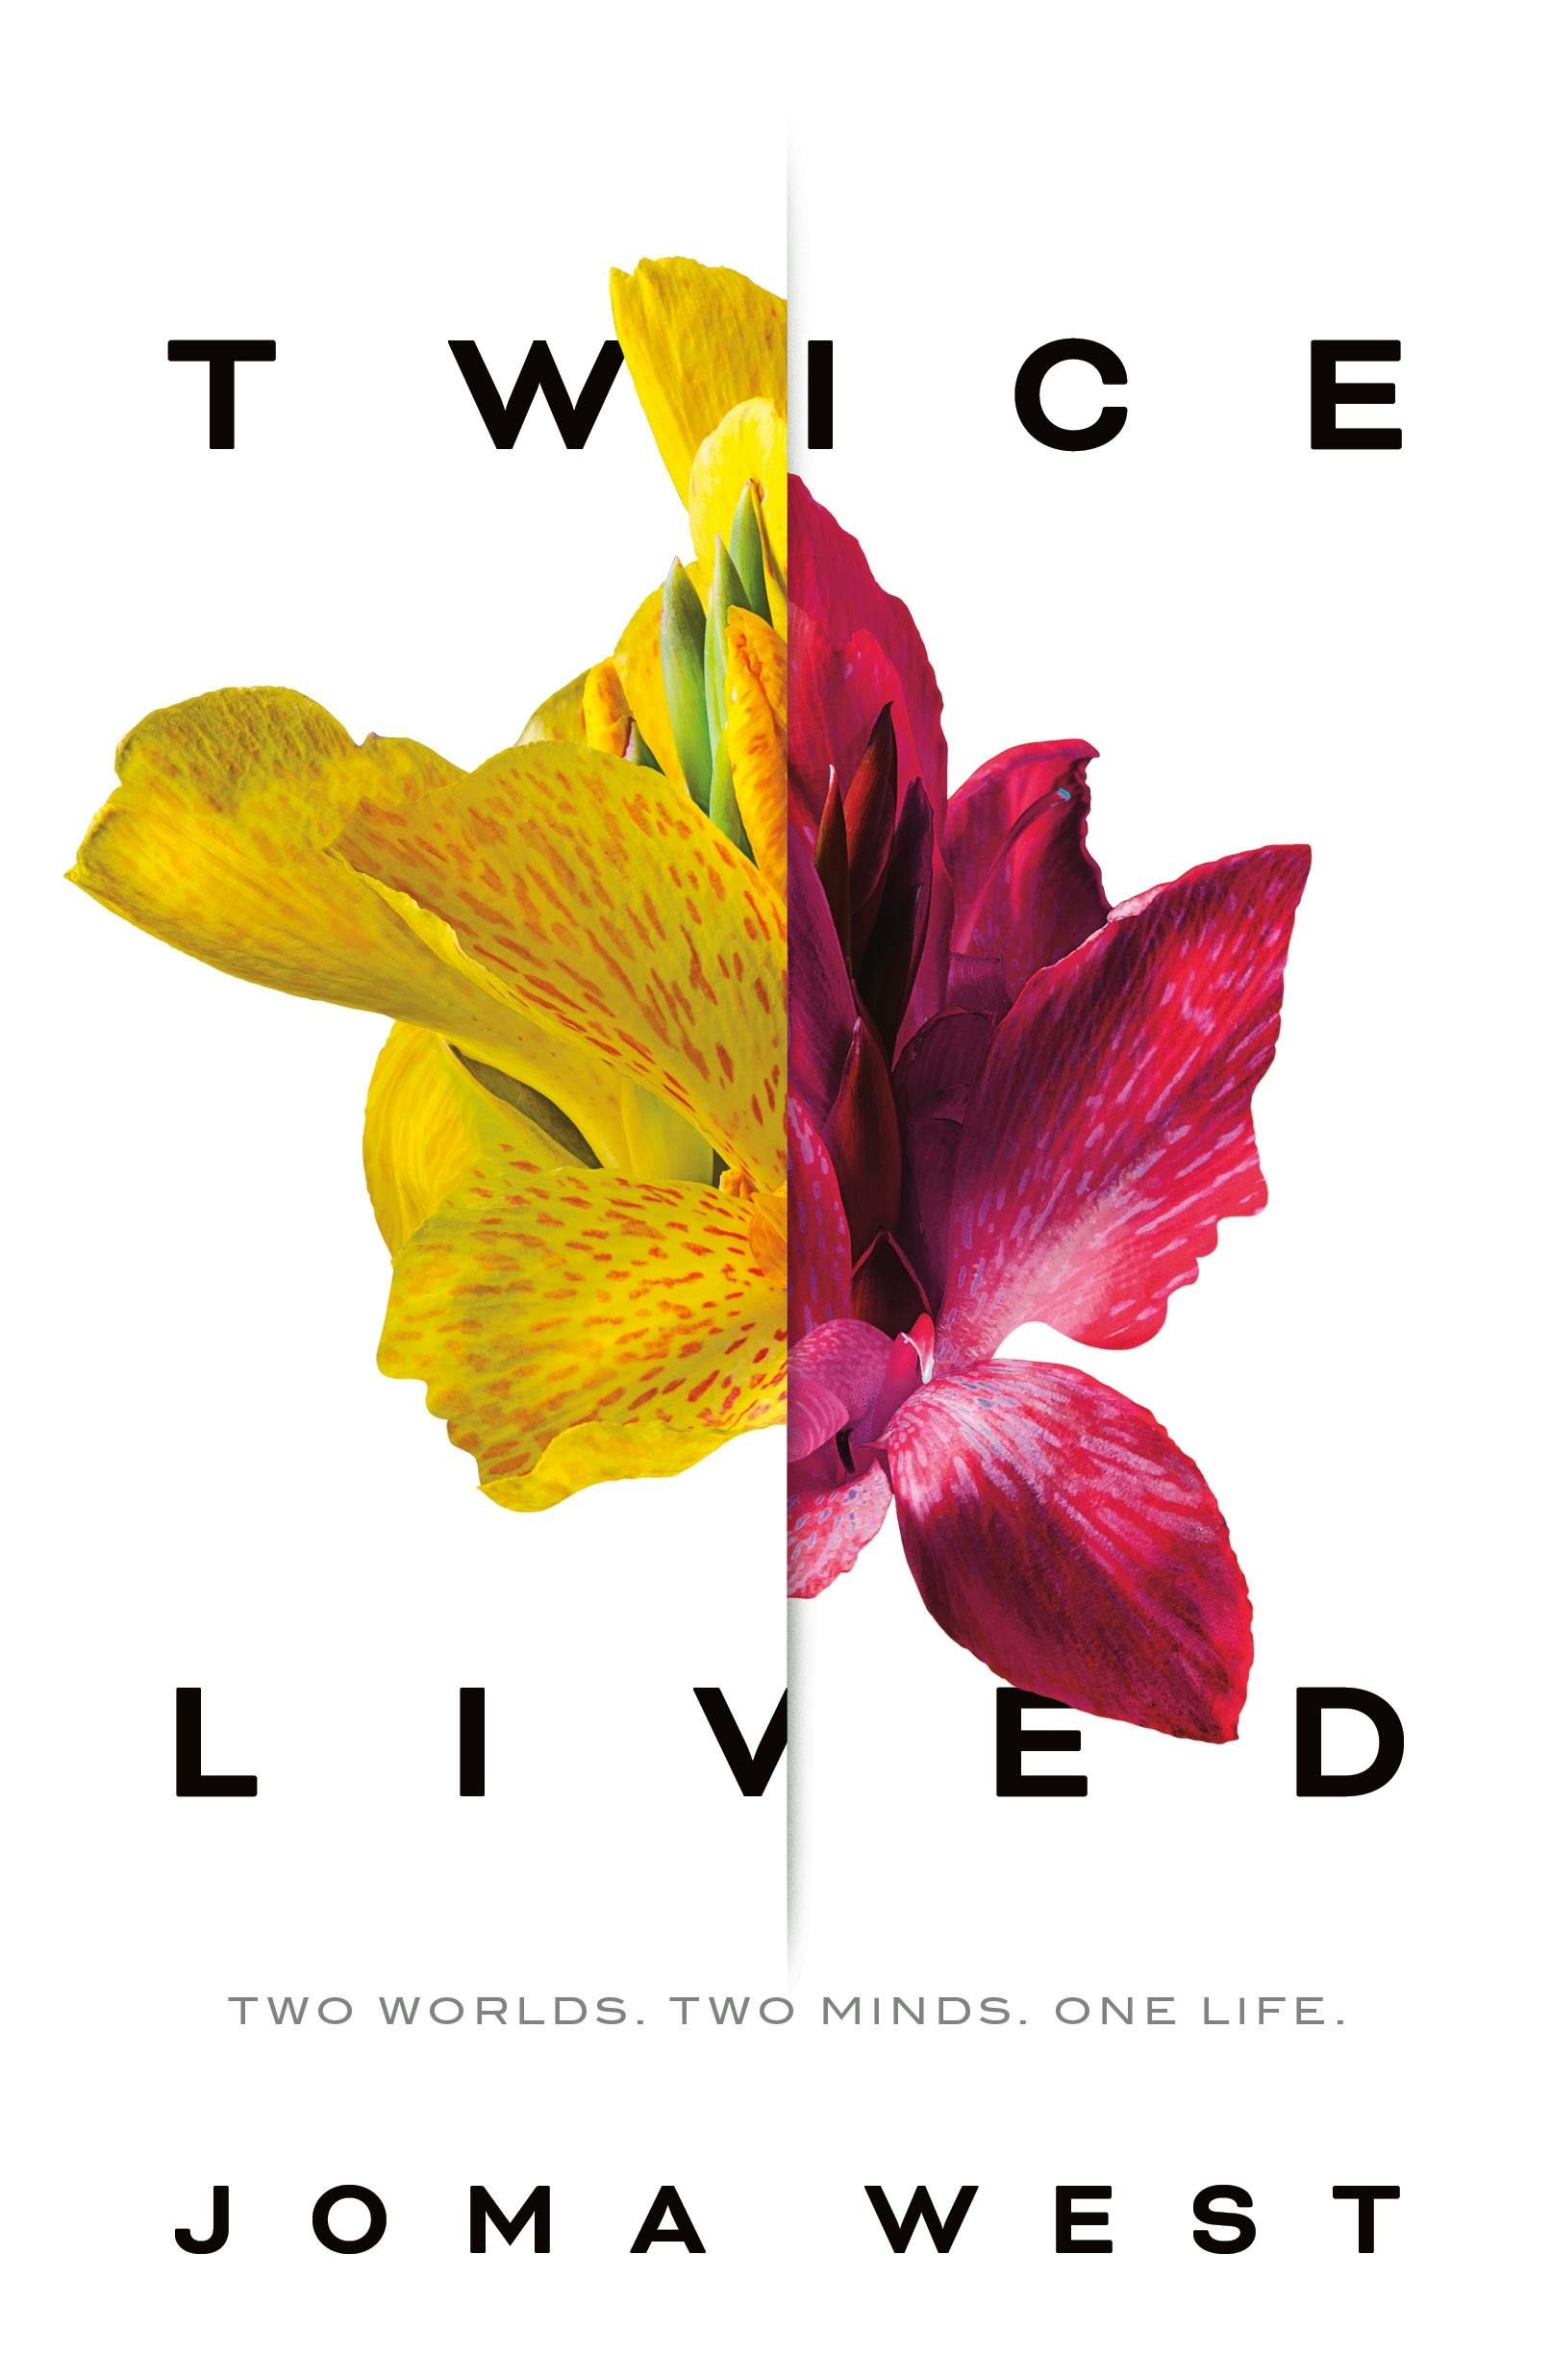 Cover for the book titled as: Twice Lived